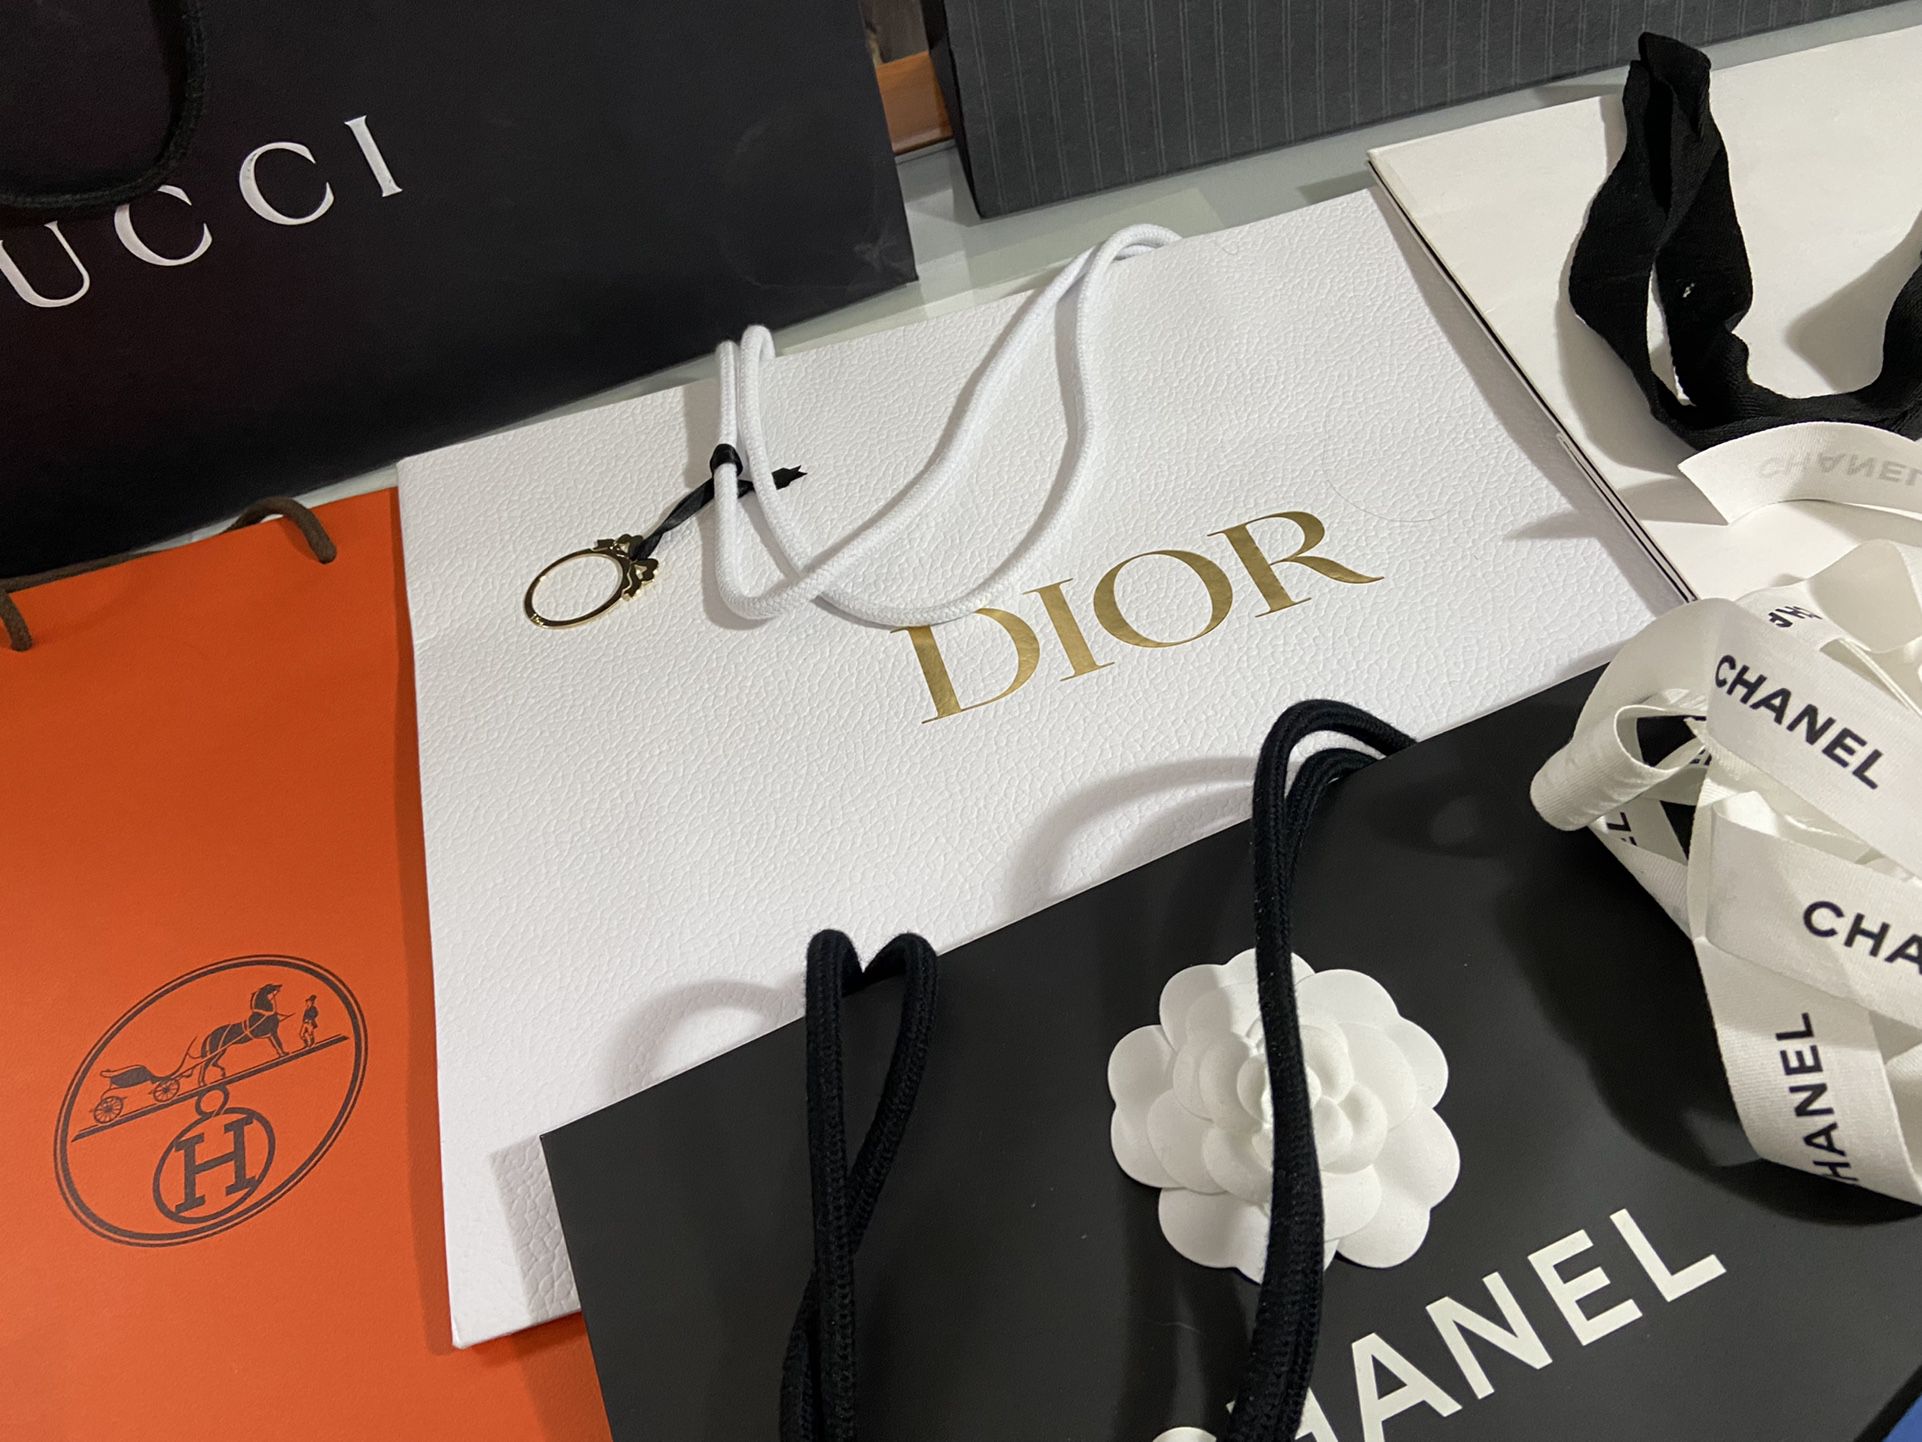 Lot Of 10 Highend Designer Gift Bags Hermes Dior Chanel Louis Vuitton for  Sale in Queens, NY - OfferUp